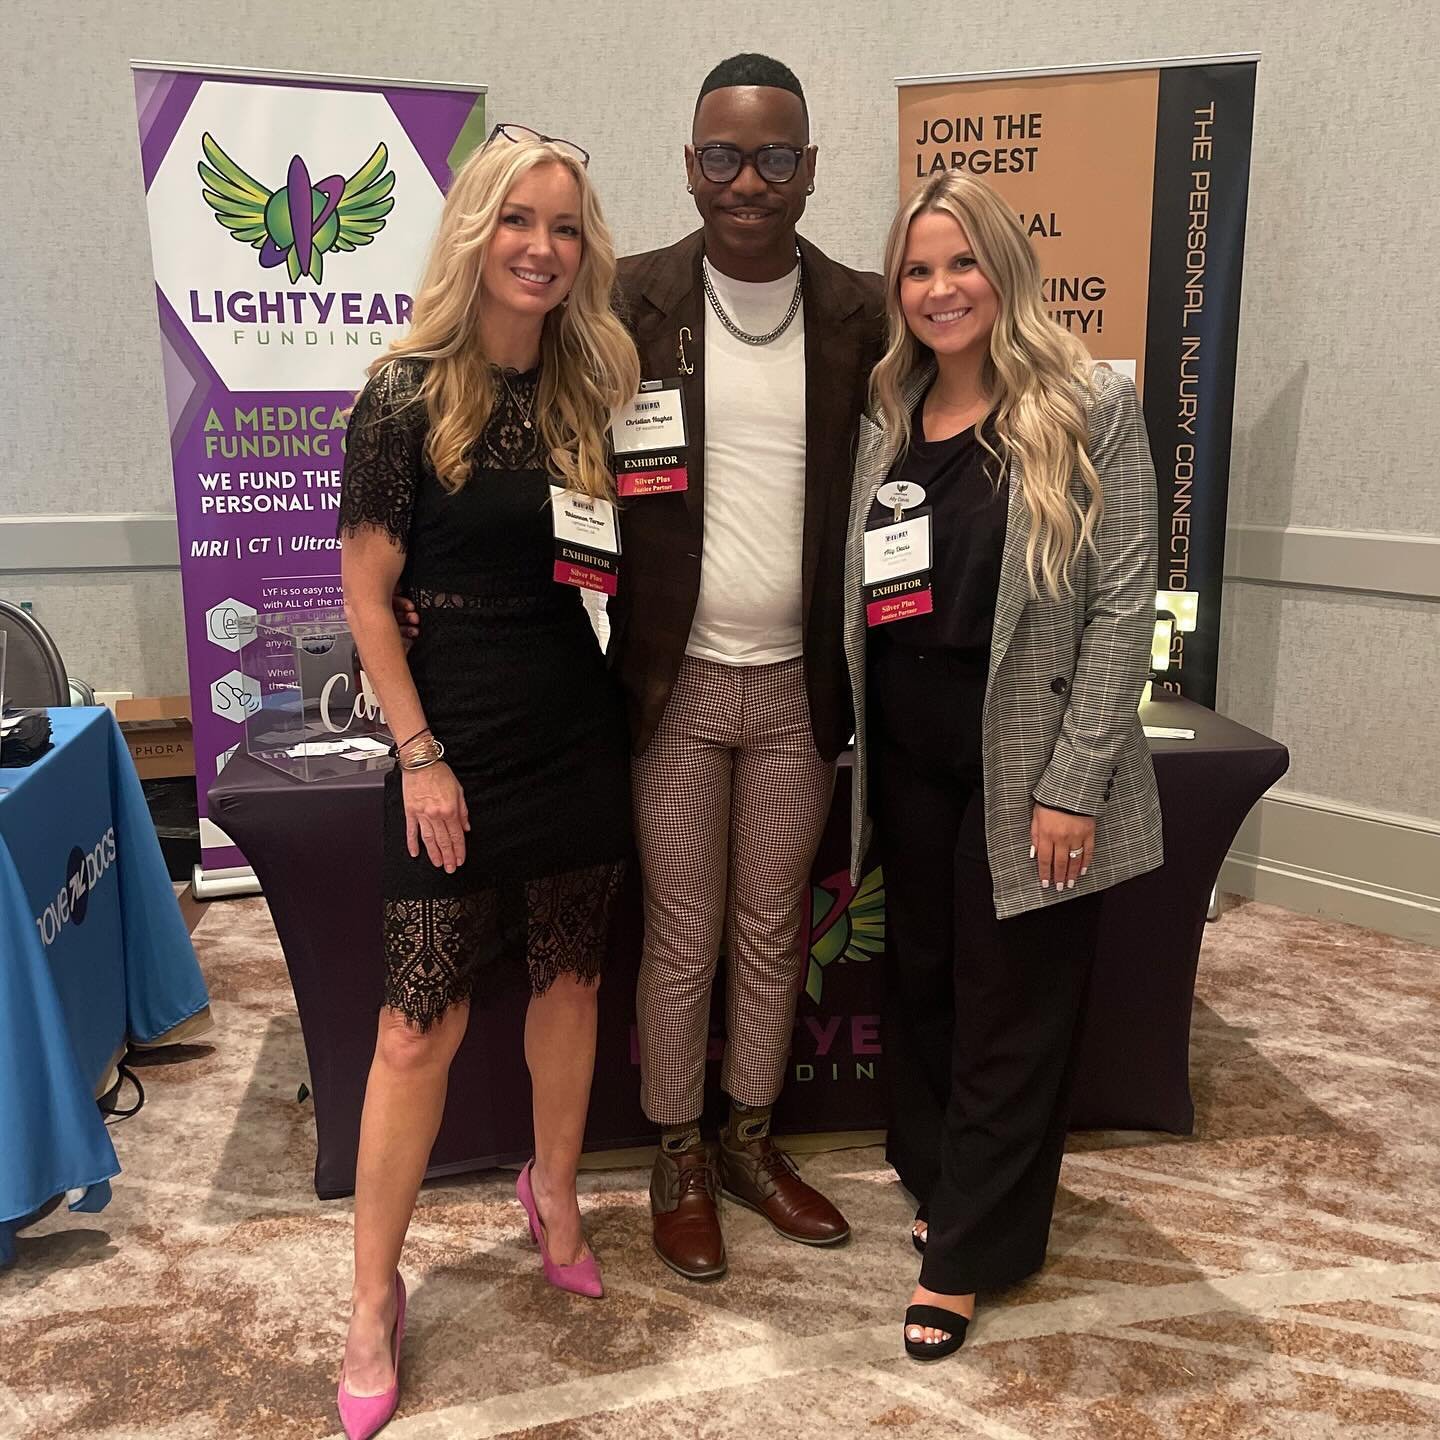 Having a blast 💥 🚀 ✨ at Lightyear&rsquo;s FIRST GTLA Annual Conference. Glad to support and sponsor this organization. 

#lightyearfunding #personalinjury #attorney #gtla